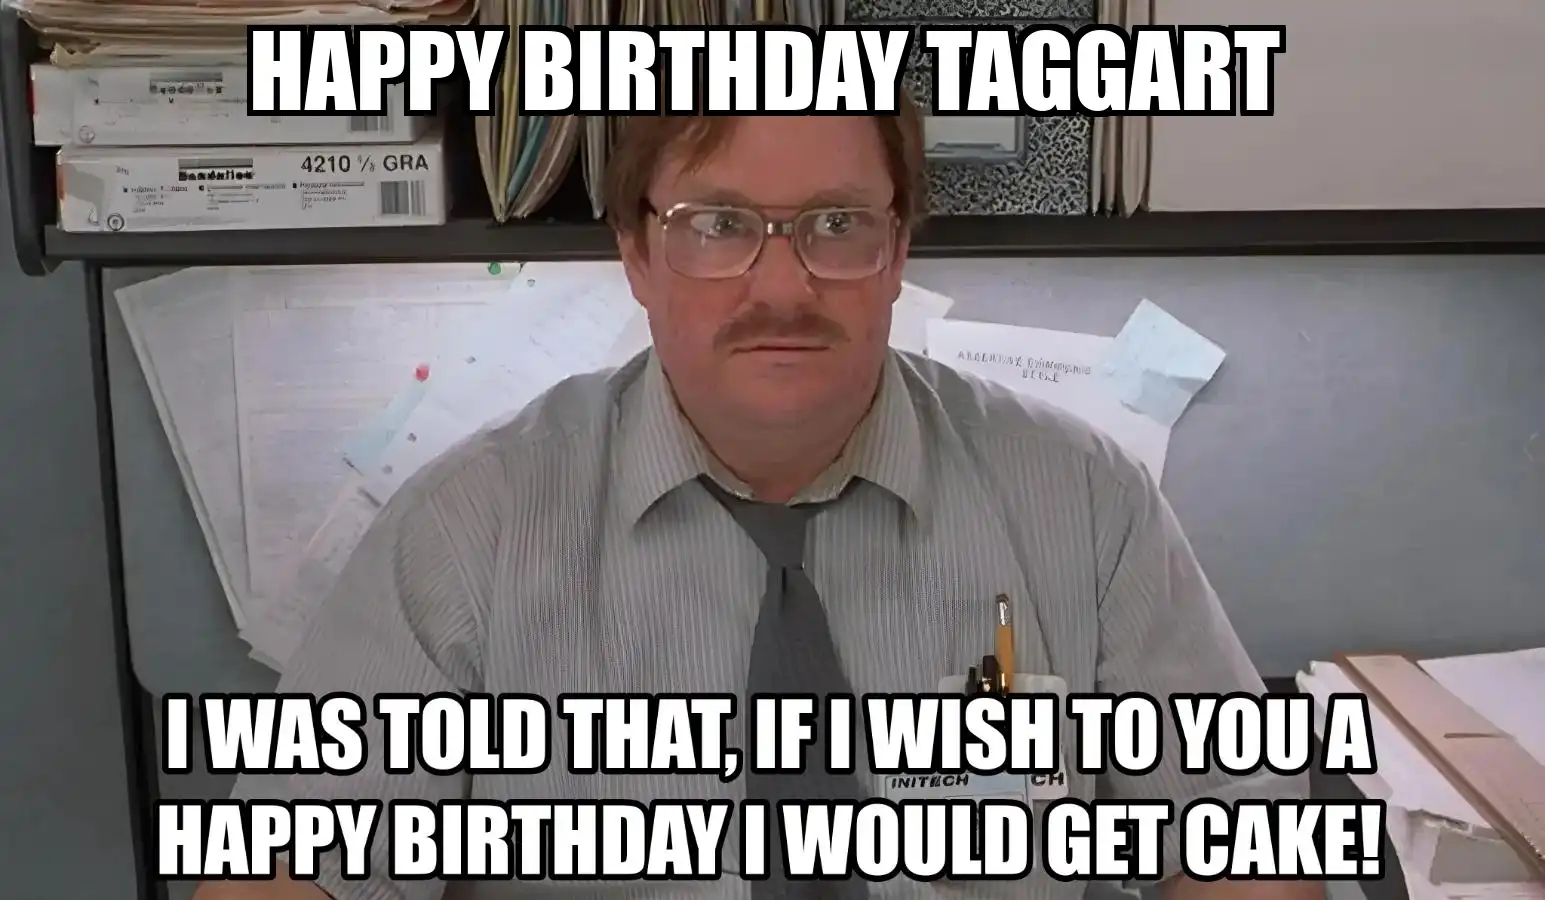 Happy Birthday Taggart I Would Get A Cake Meme